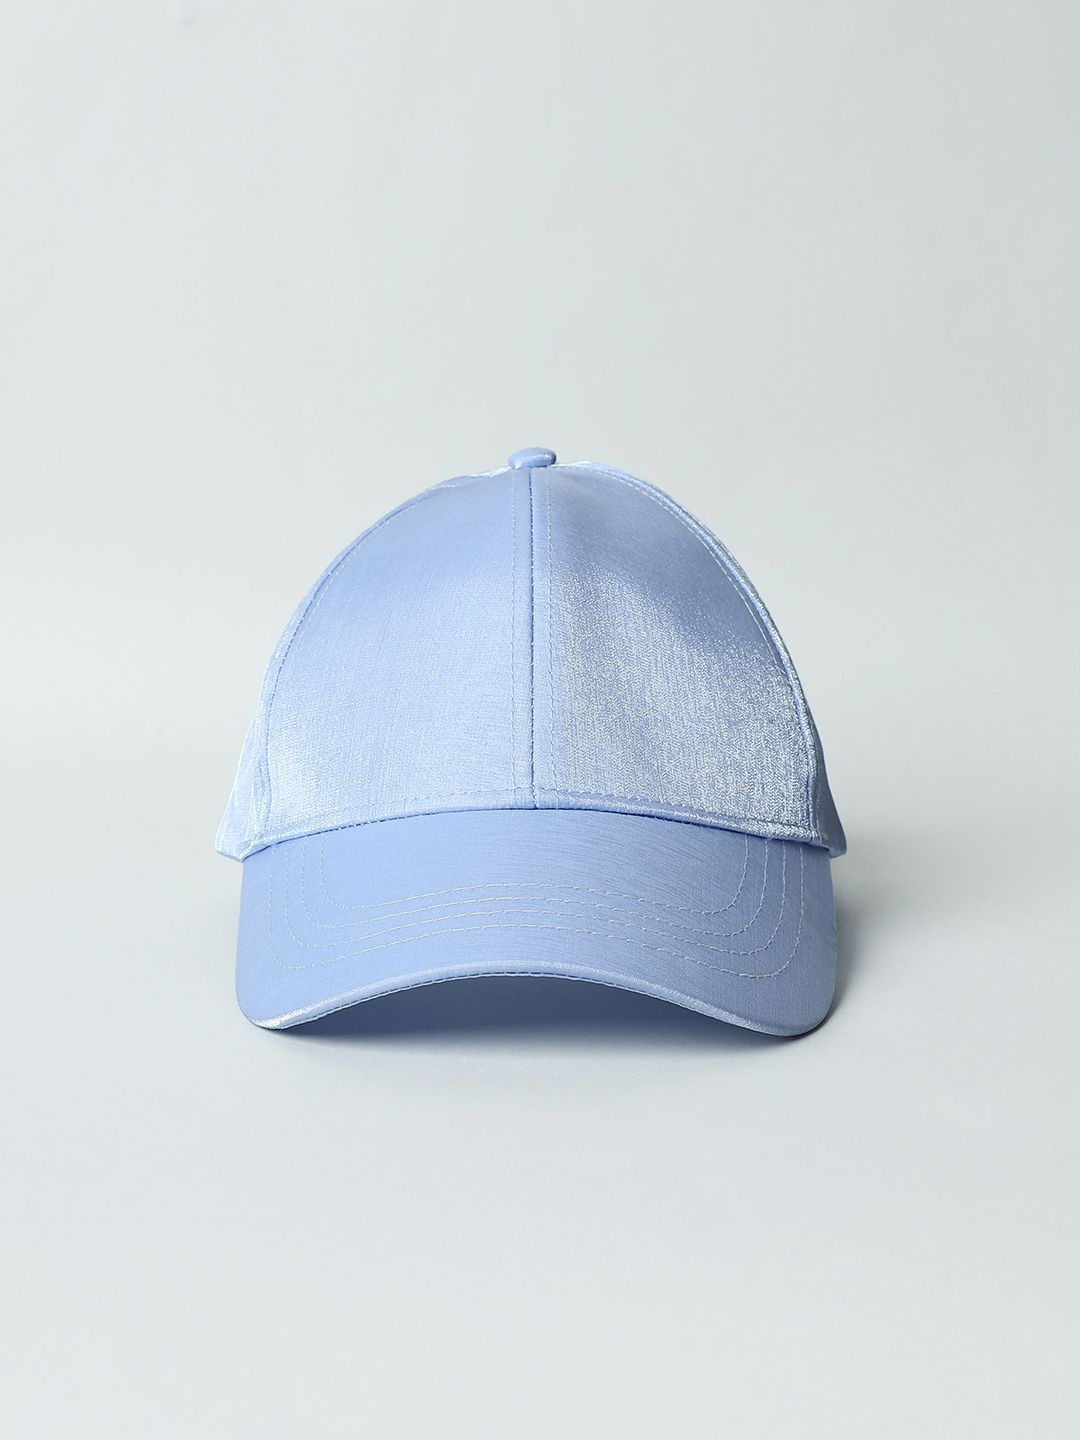 ONLY Women Blue Baseball Cap Price in India